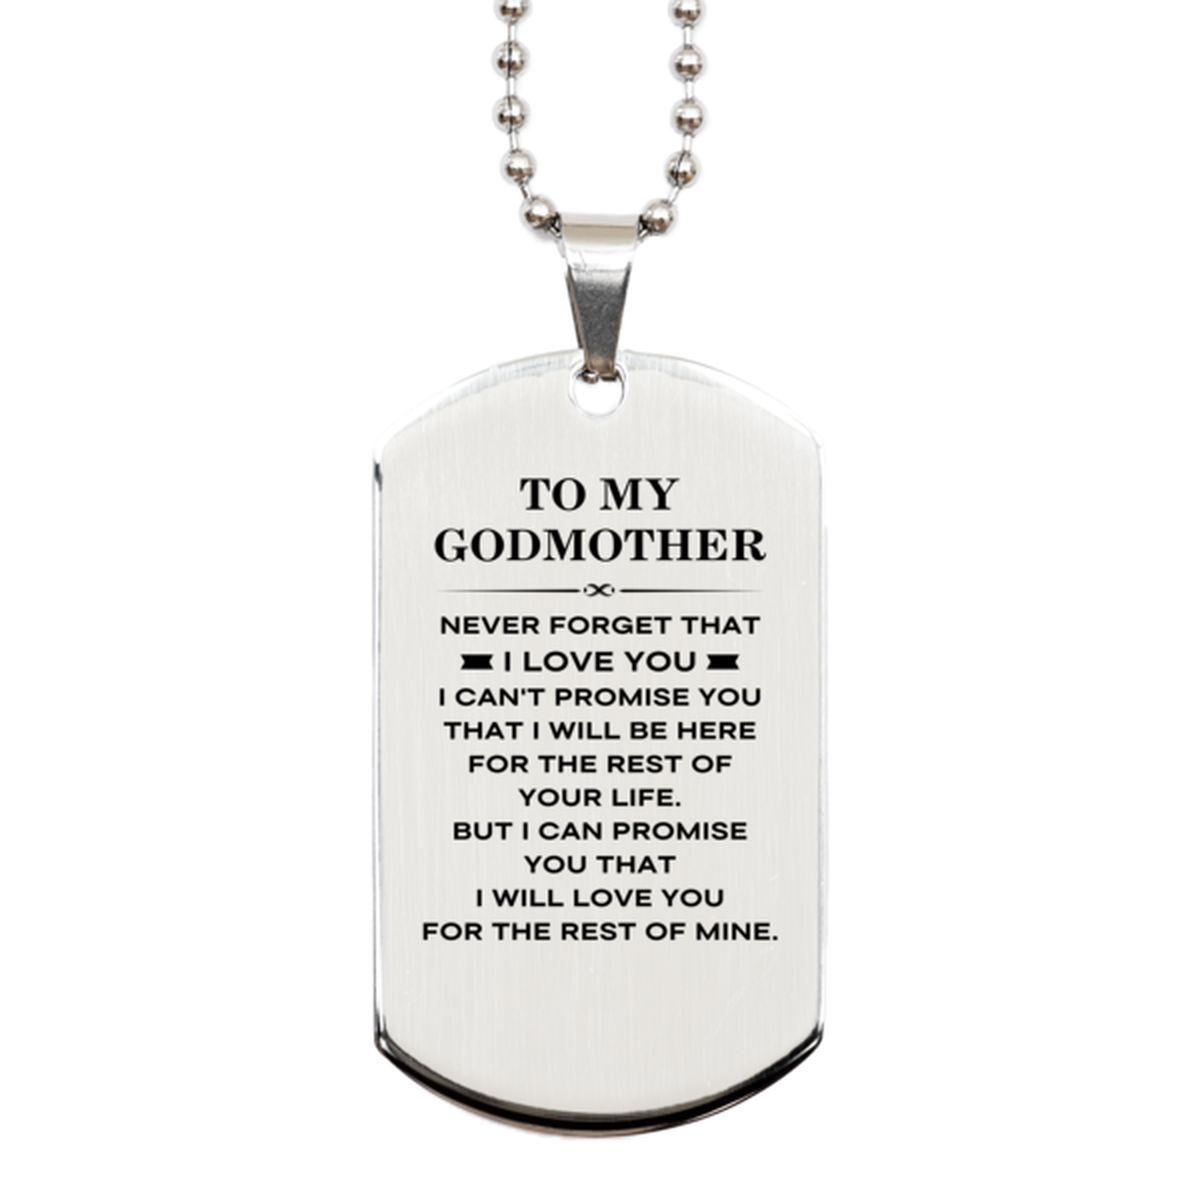 To My Godmother Gifts, I will love you for the rest of mine, Love Godmother Dog Tag Necklace, Birthday Christmas Unique Silver Dog Tag For Godmother